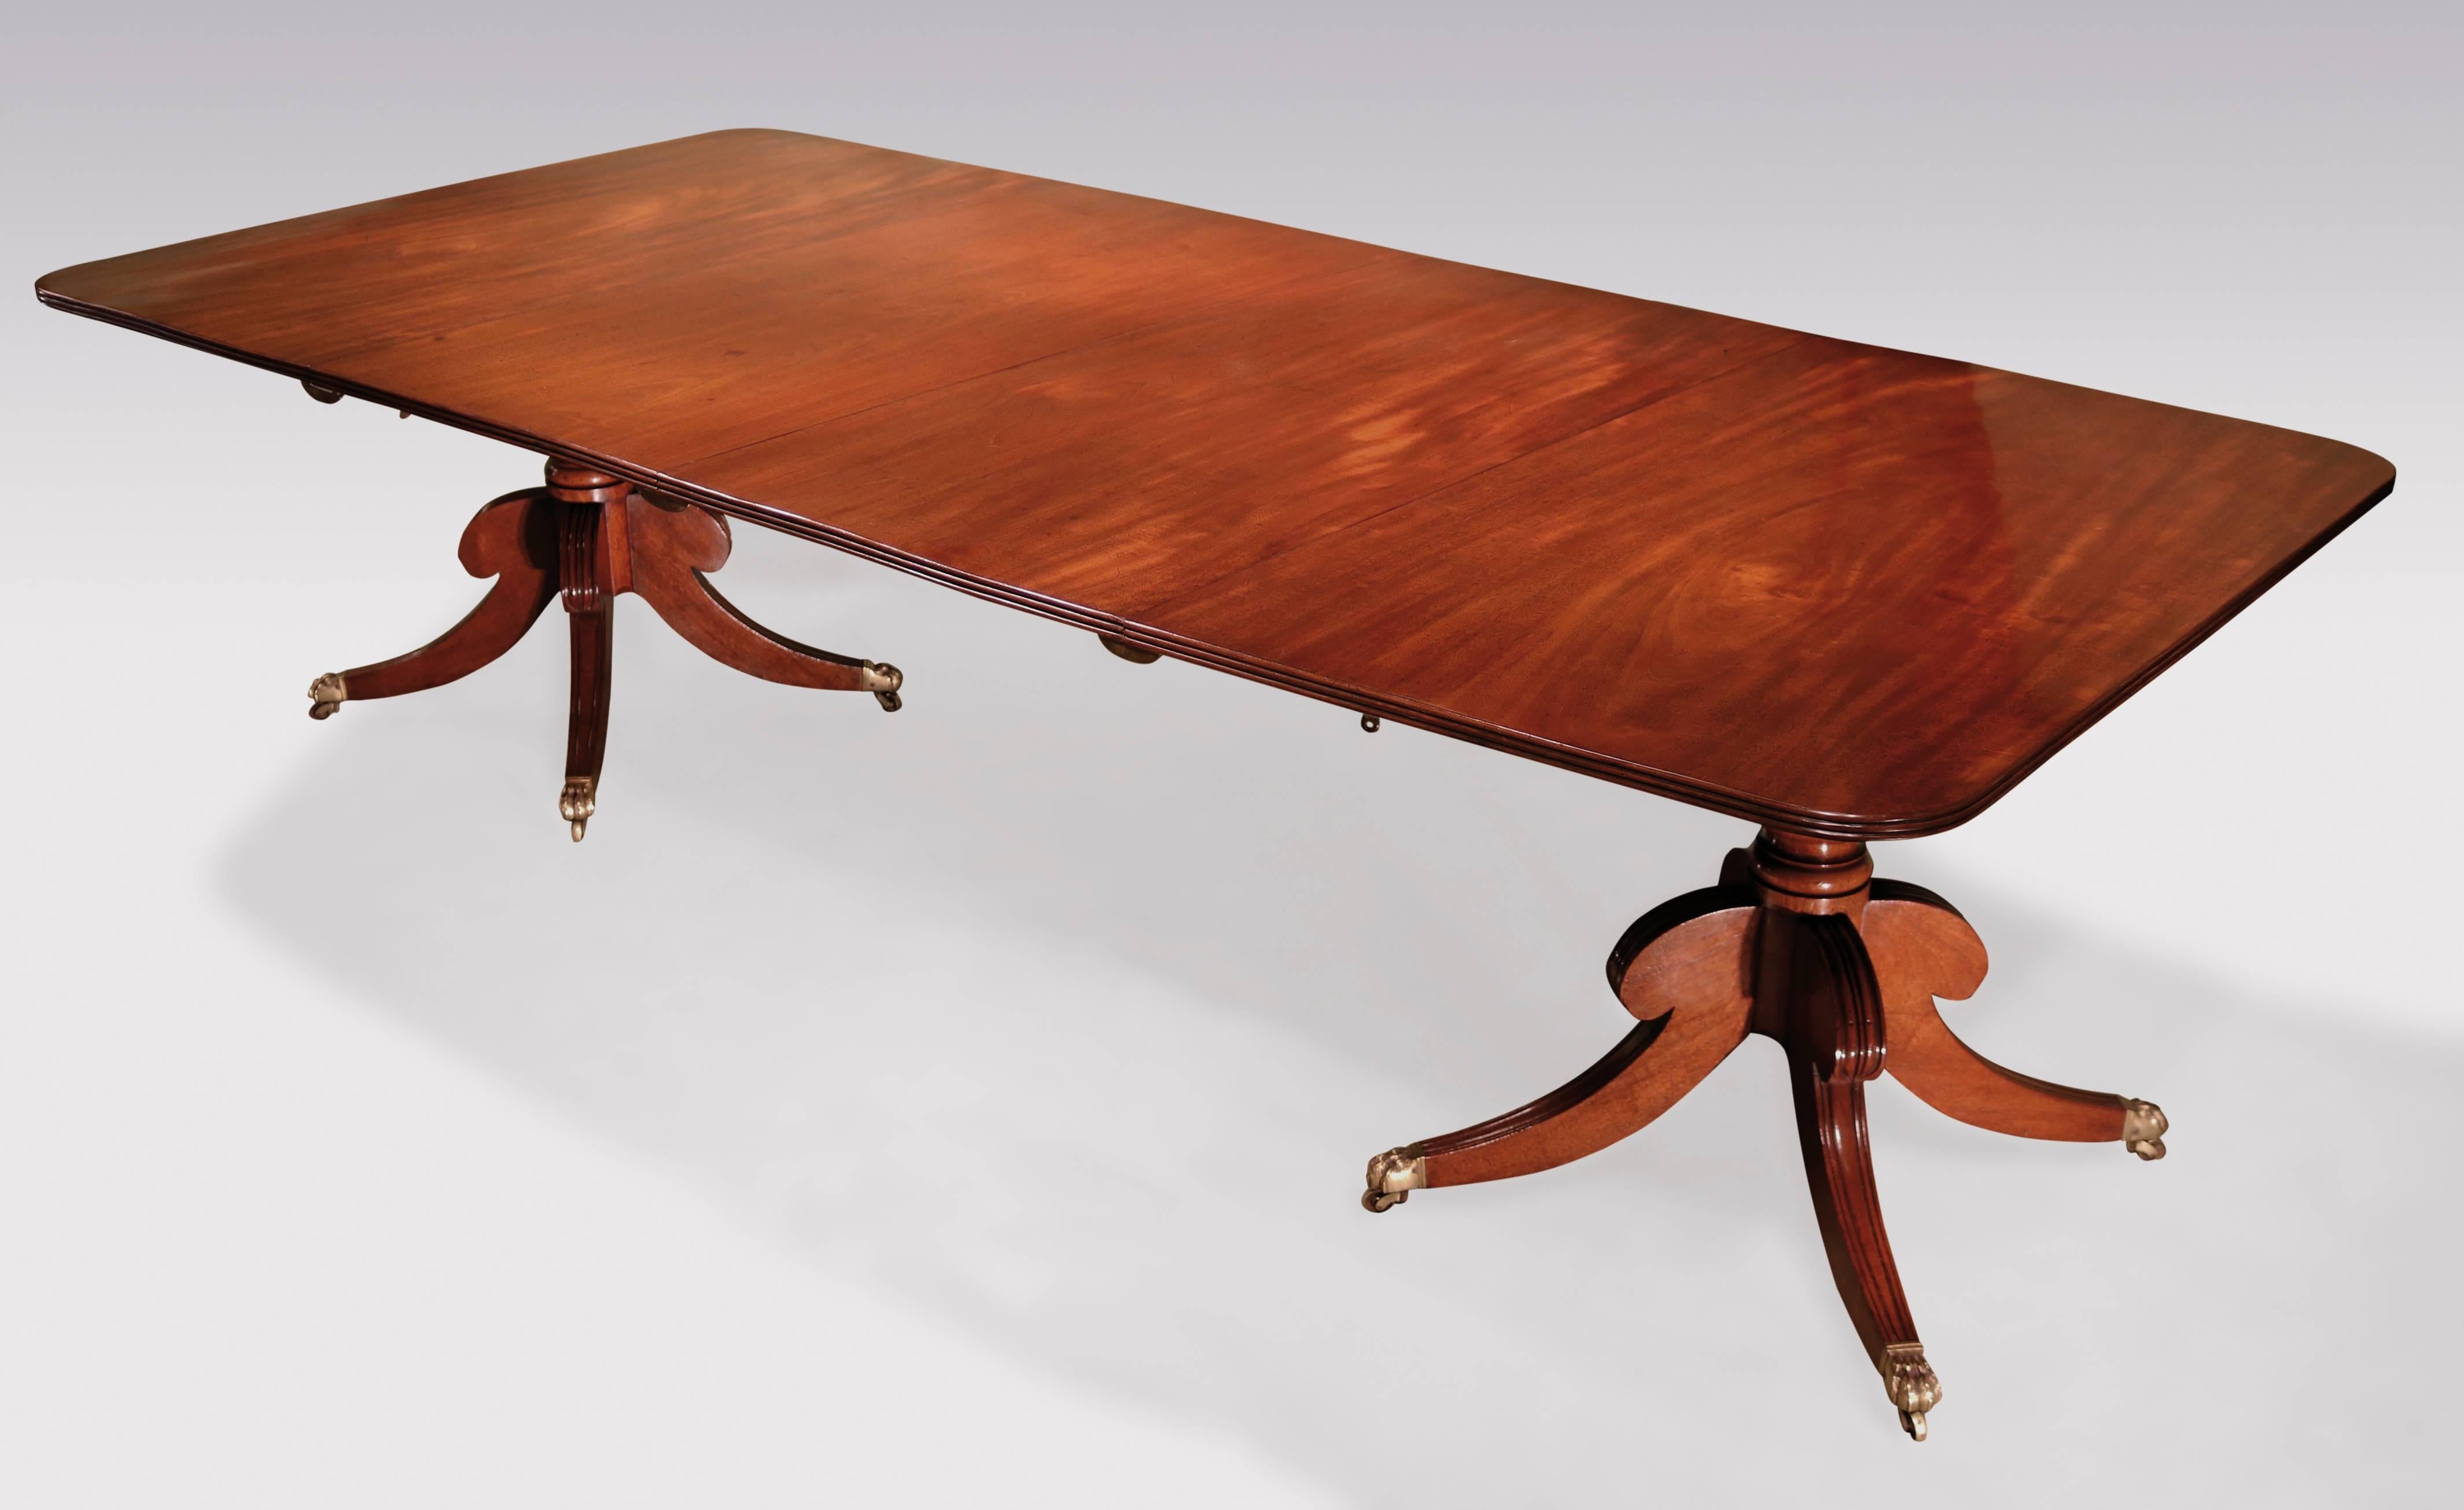 An early 19th century Regency period well-figured mahogany two-pedestal dining table fitted with two leaves, having reeded edged tops, supported on ring-turned stems above reeded four-splay legs ending on original lion’s paw brass castors. Measures: